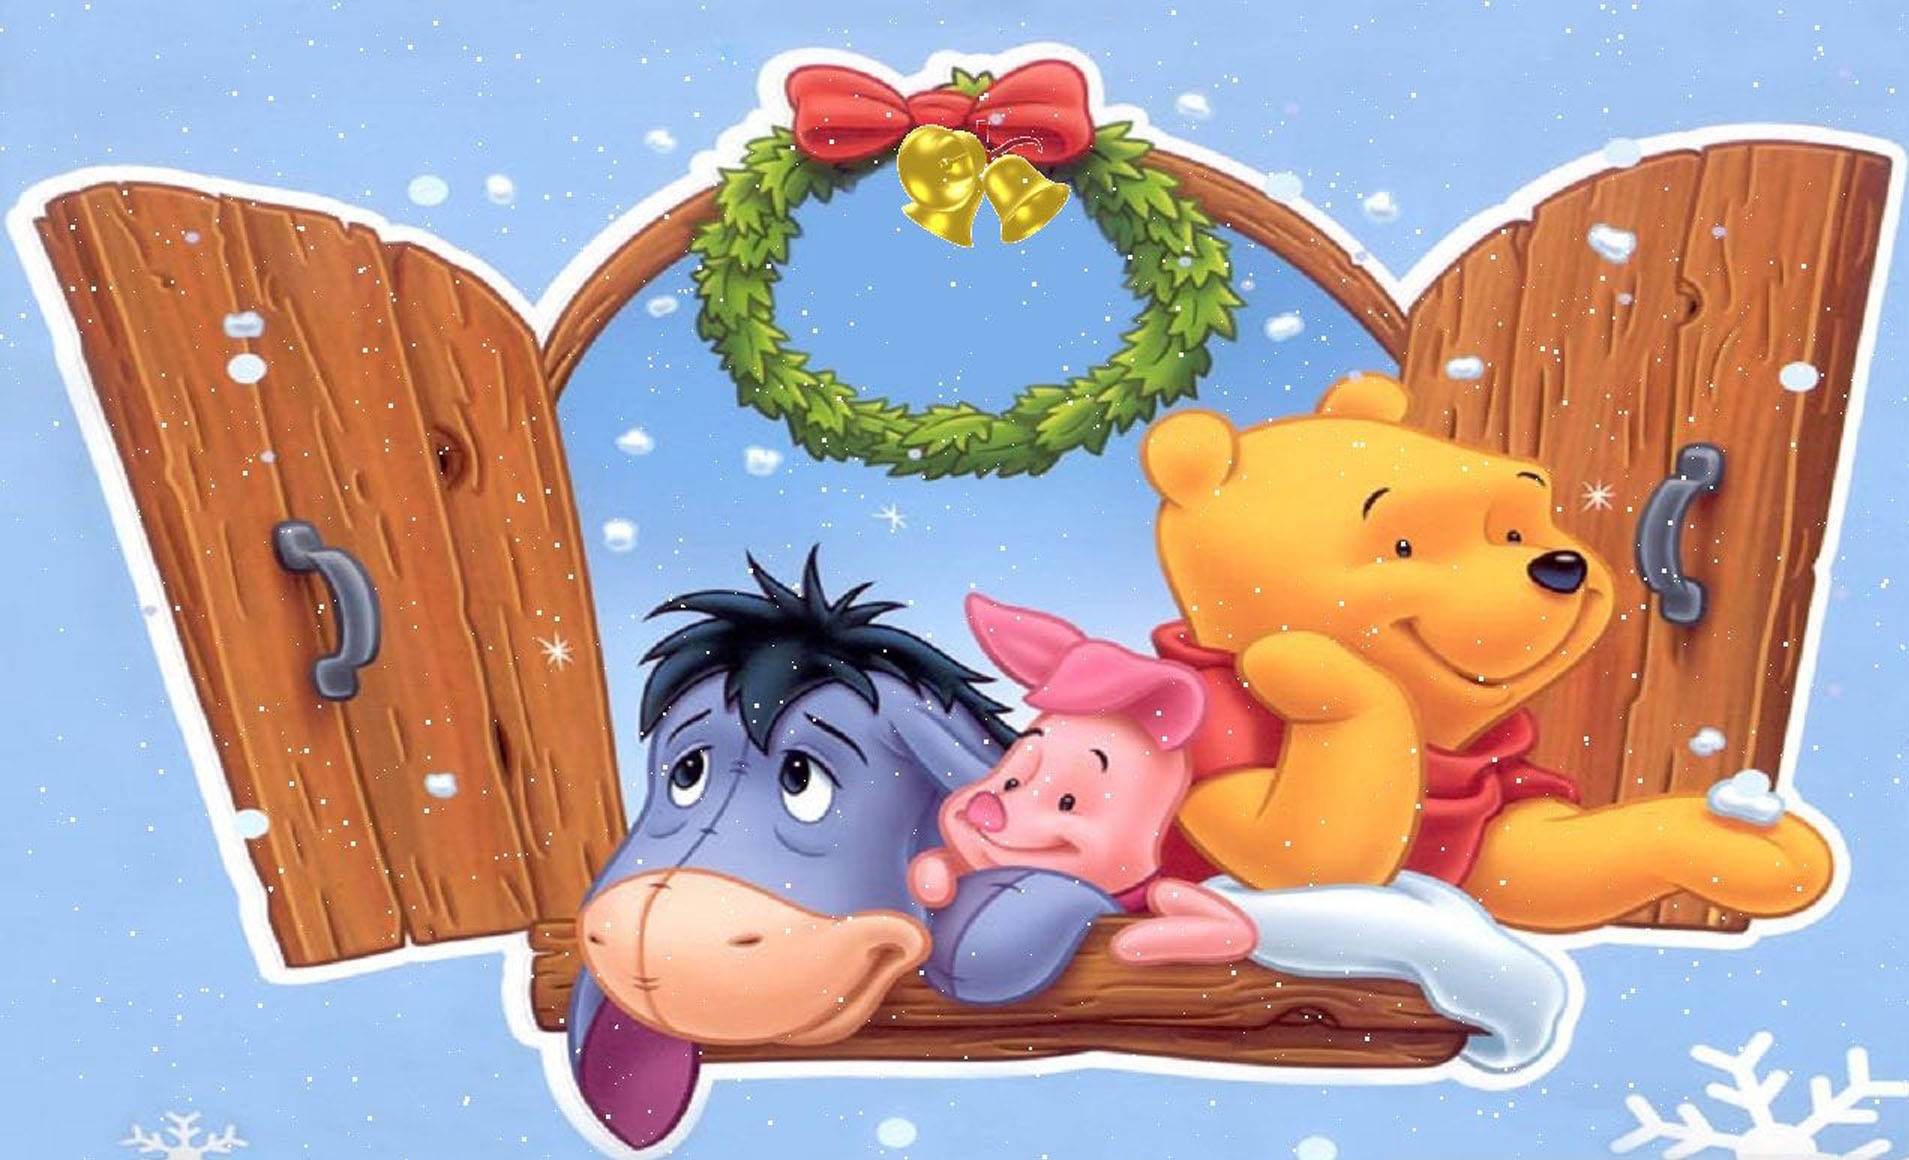 Download Winnie The Pooh Christmas Wallpaper | Wallpapers.com